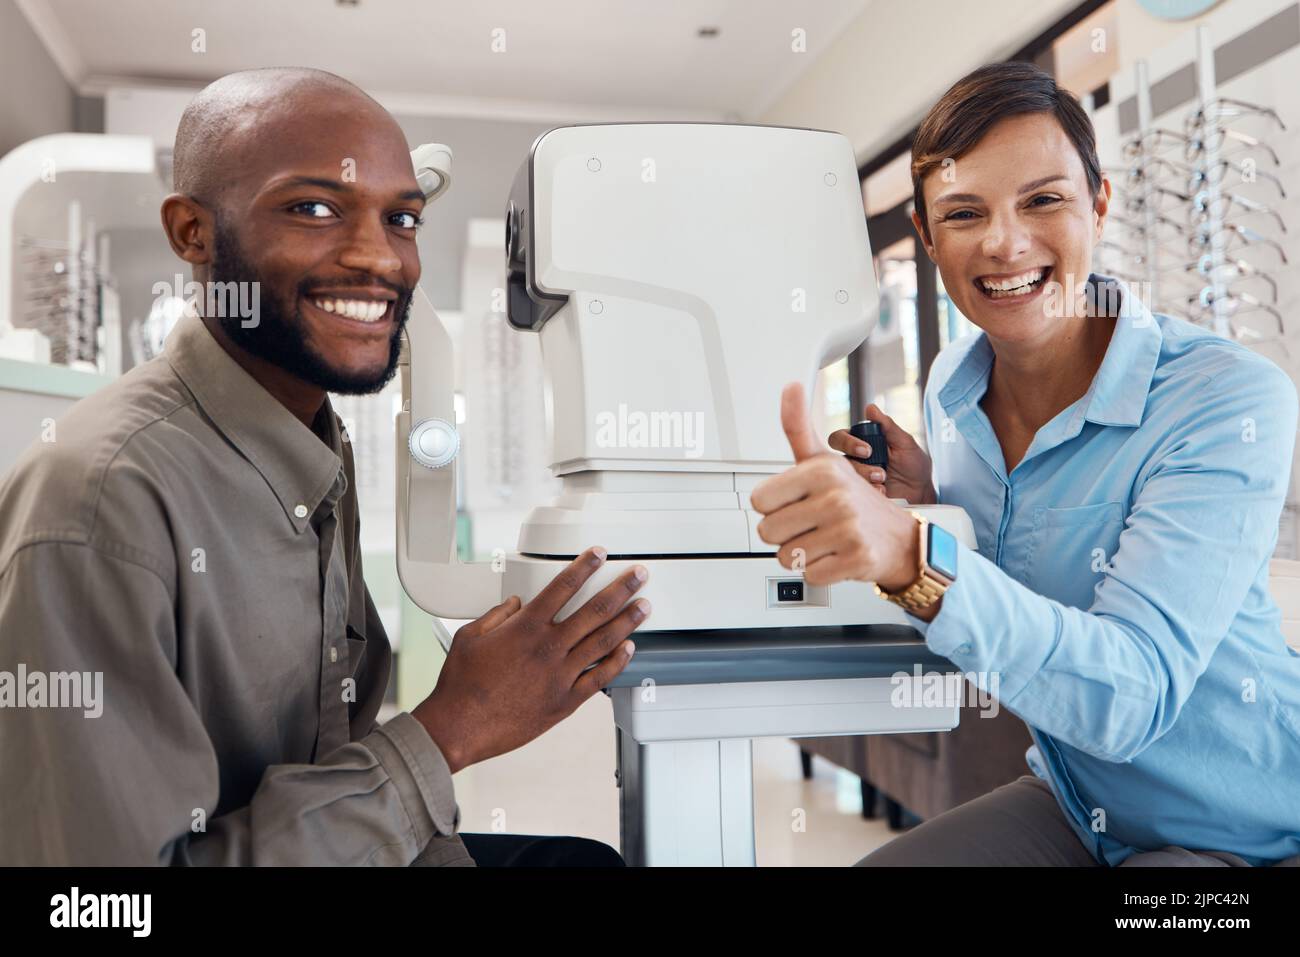 Eye doctor giving thumbs up after a successful vision test with a happy male patient, portrait. Smiling female optometrist gives a positive gesture Stock Photo